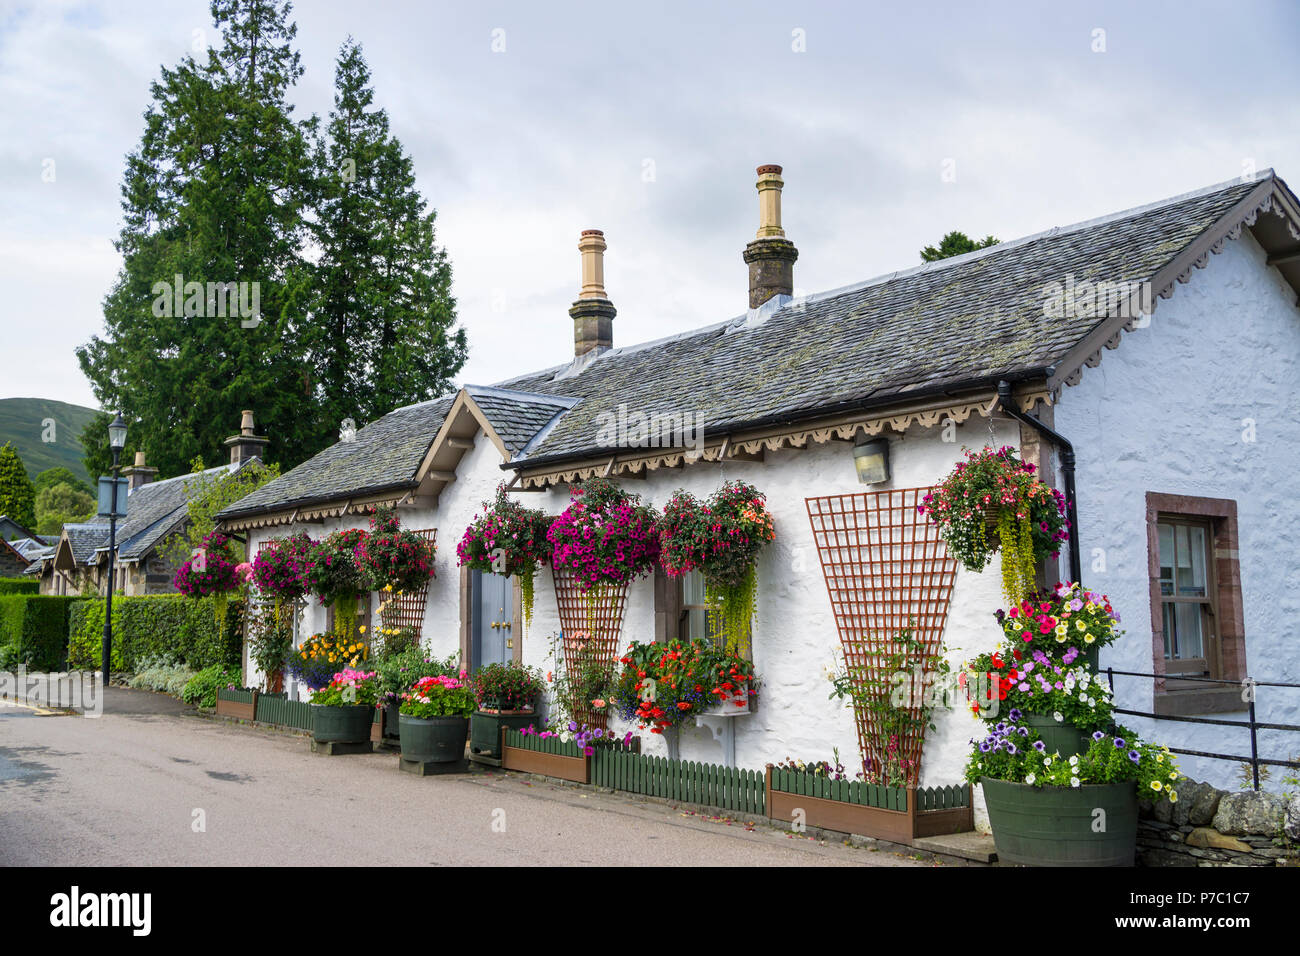 Pretty cottage with hanging baskets in Luss on Loch Lomond. Luss has been named as the most beautiful village in Scotland. Stock Photo